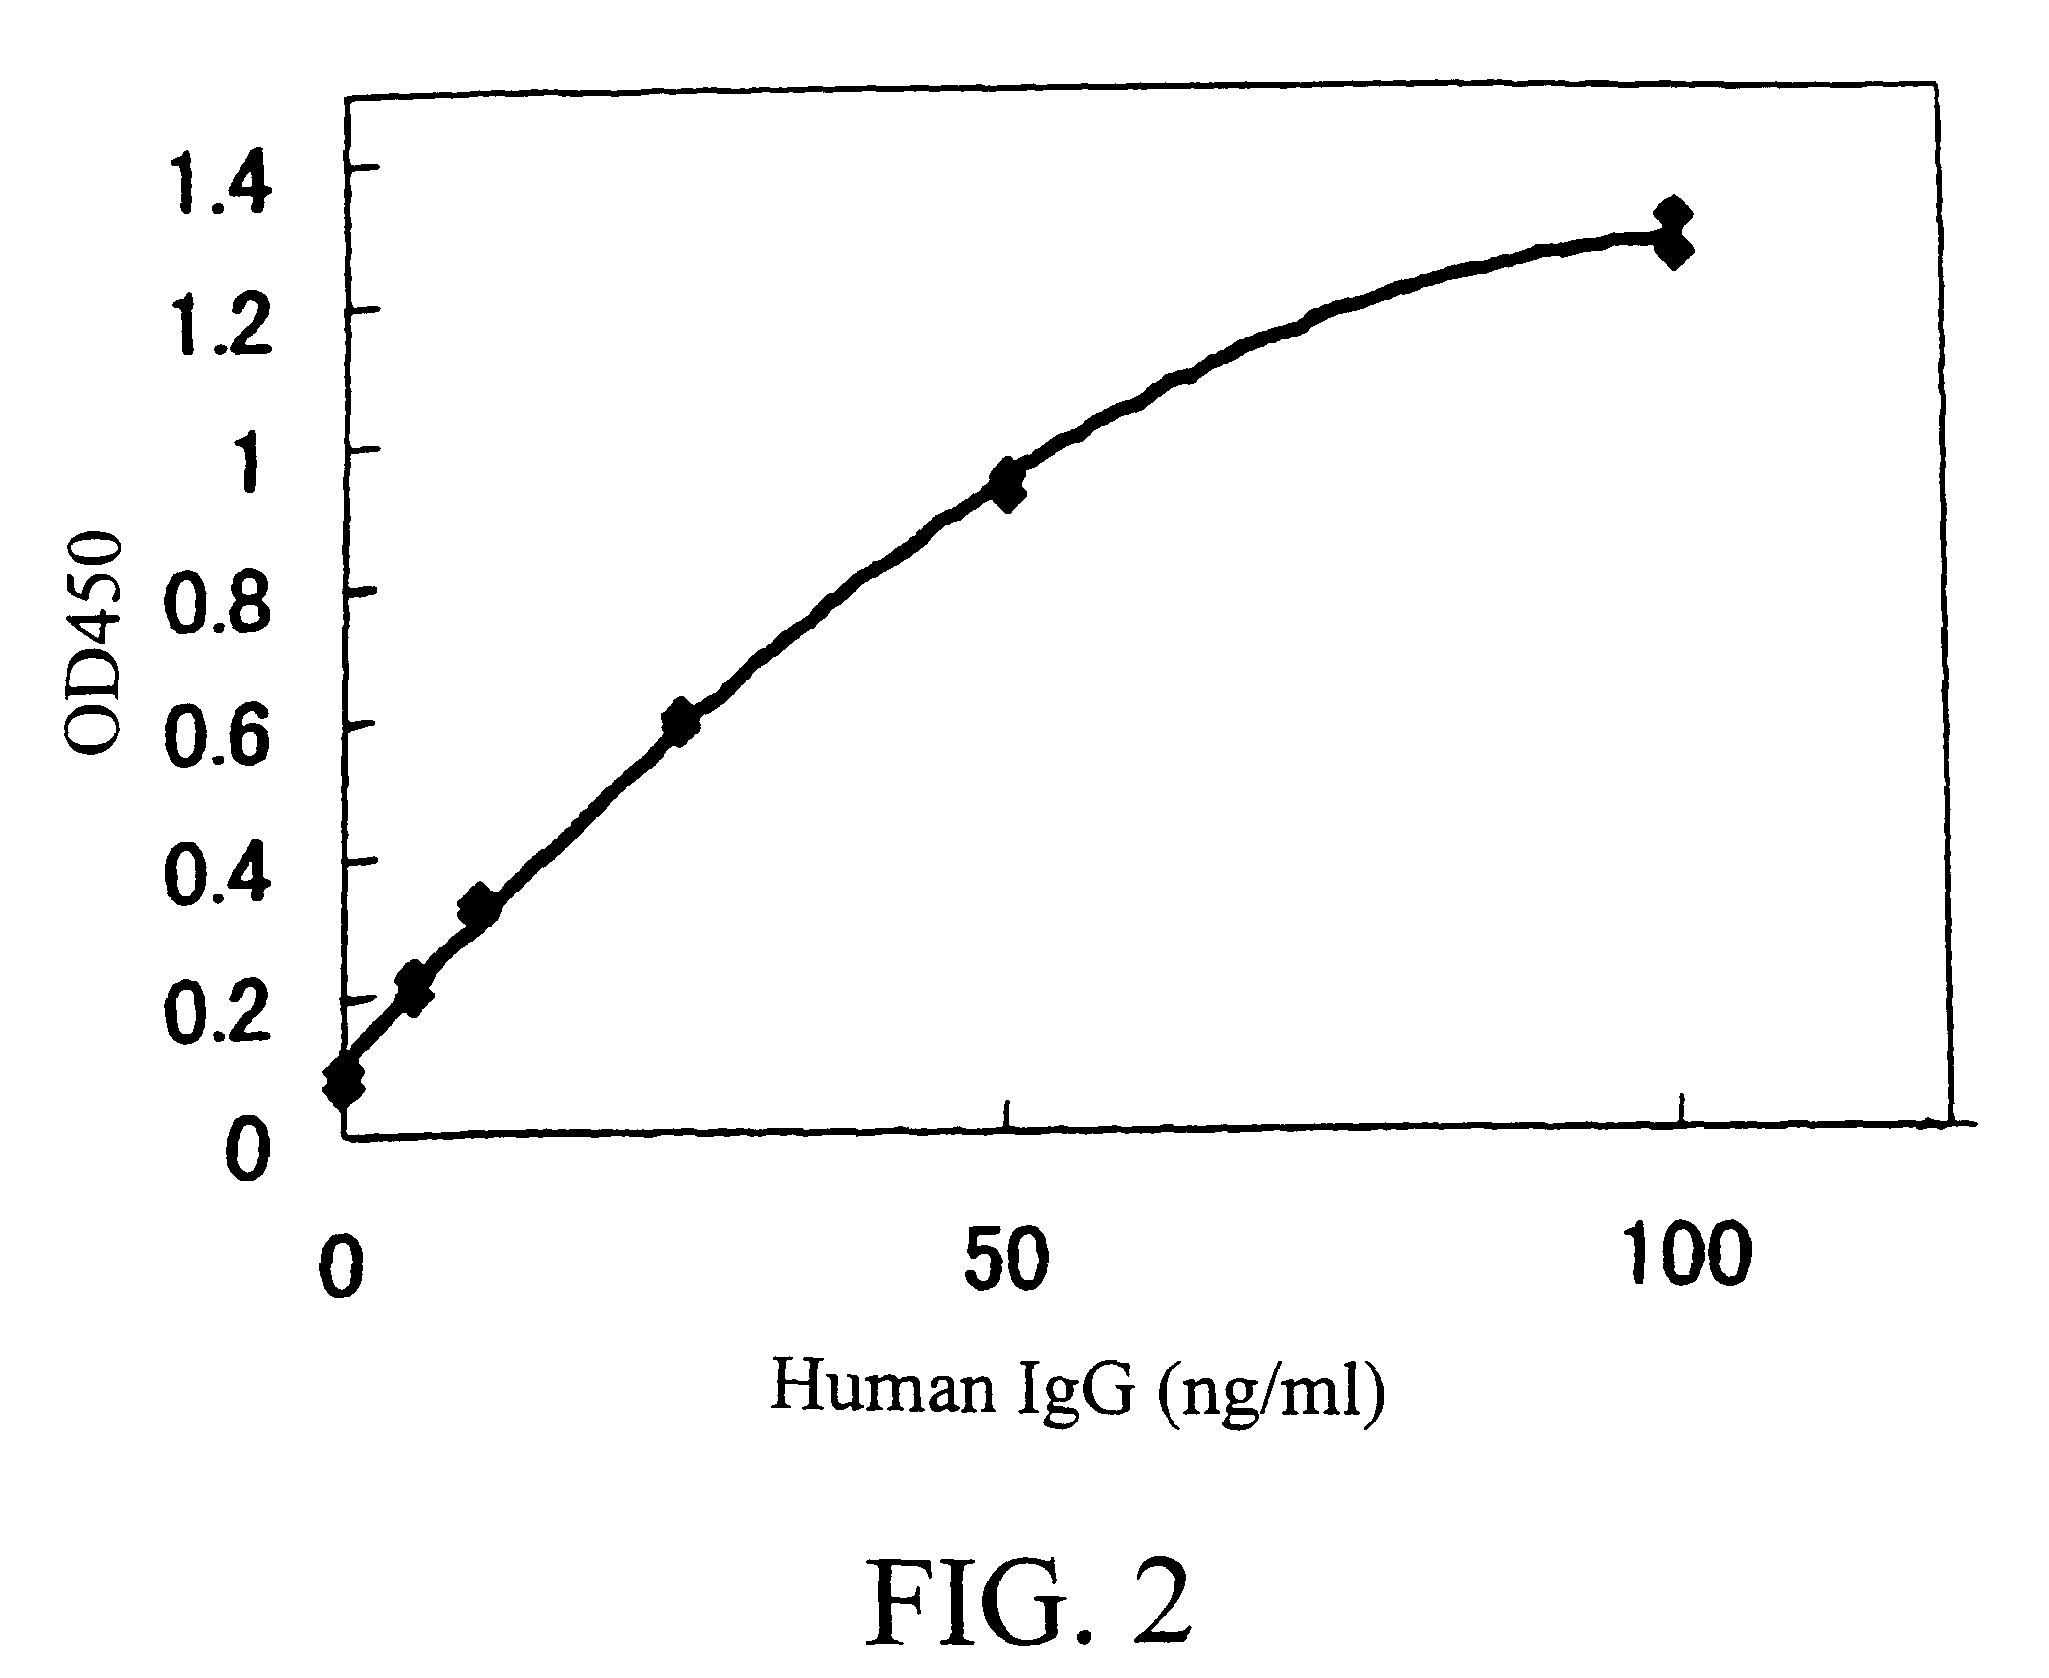 Methods of treating an inflammatory disorder and prohibiting proliferation, cytokine production, and signal transduction with antibody against costimulatory signal transduction molecule AILIM